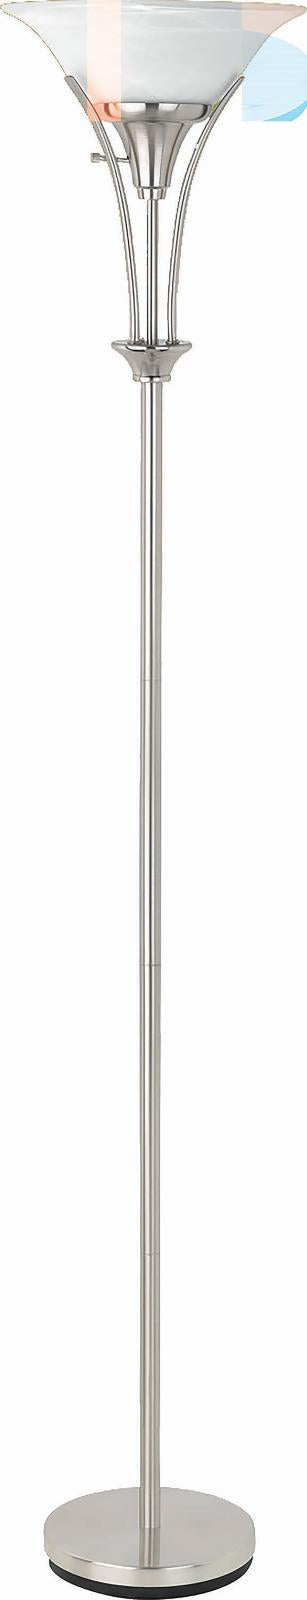 G901193 - Floor Lamp With Frosted Ribbed Shade - Brushed Steel